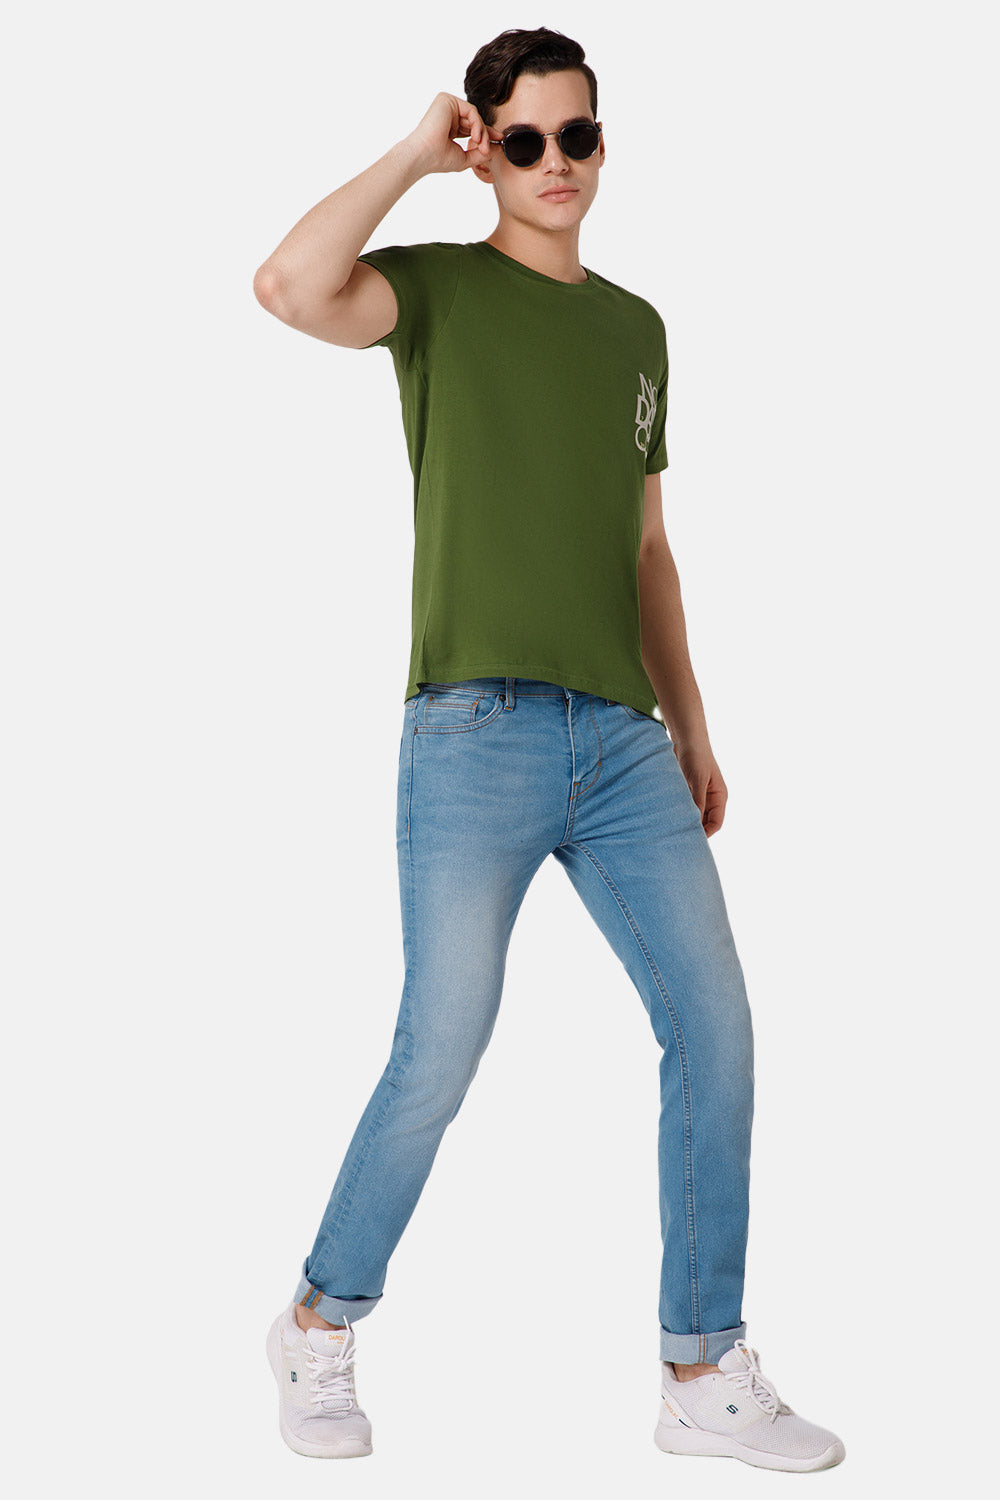 Enhance Printed Crew Neck Men's Casual T-Shirts - Olive - TS14